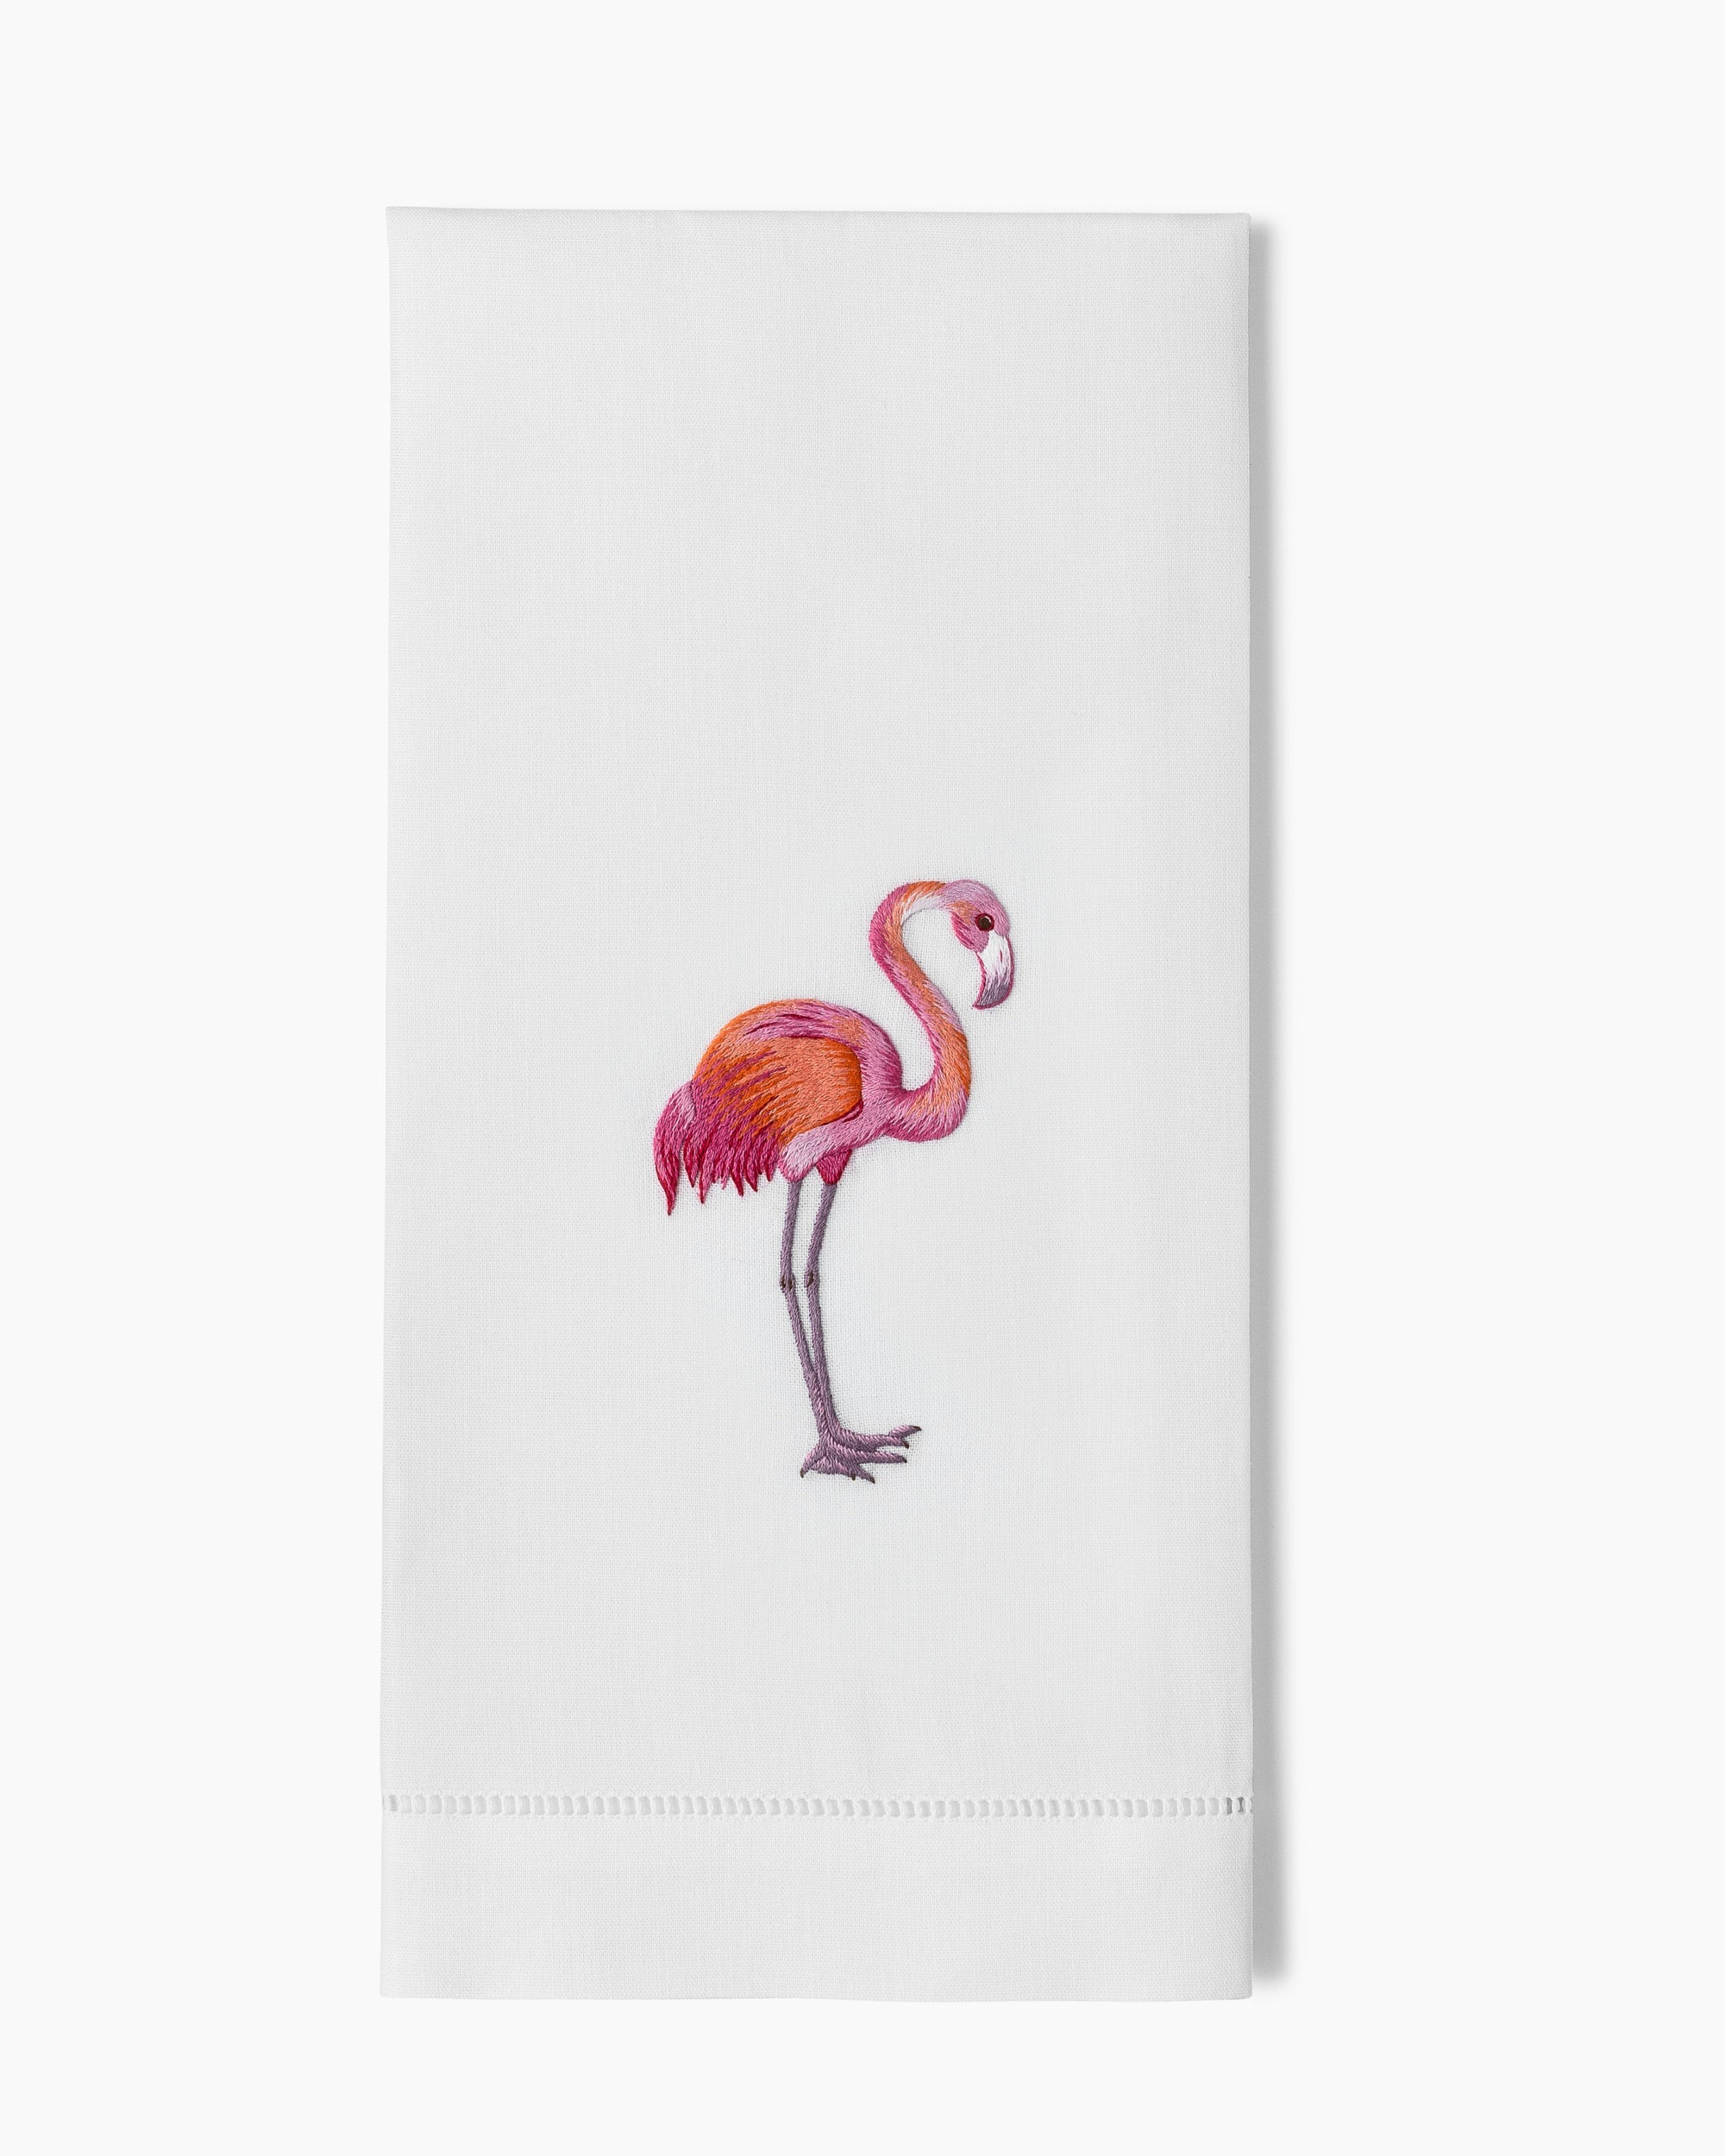 Embroidered Towels, Pretty in Pink Flamingo Embroidered Hand Towel,  Bathroom Towels